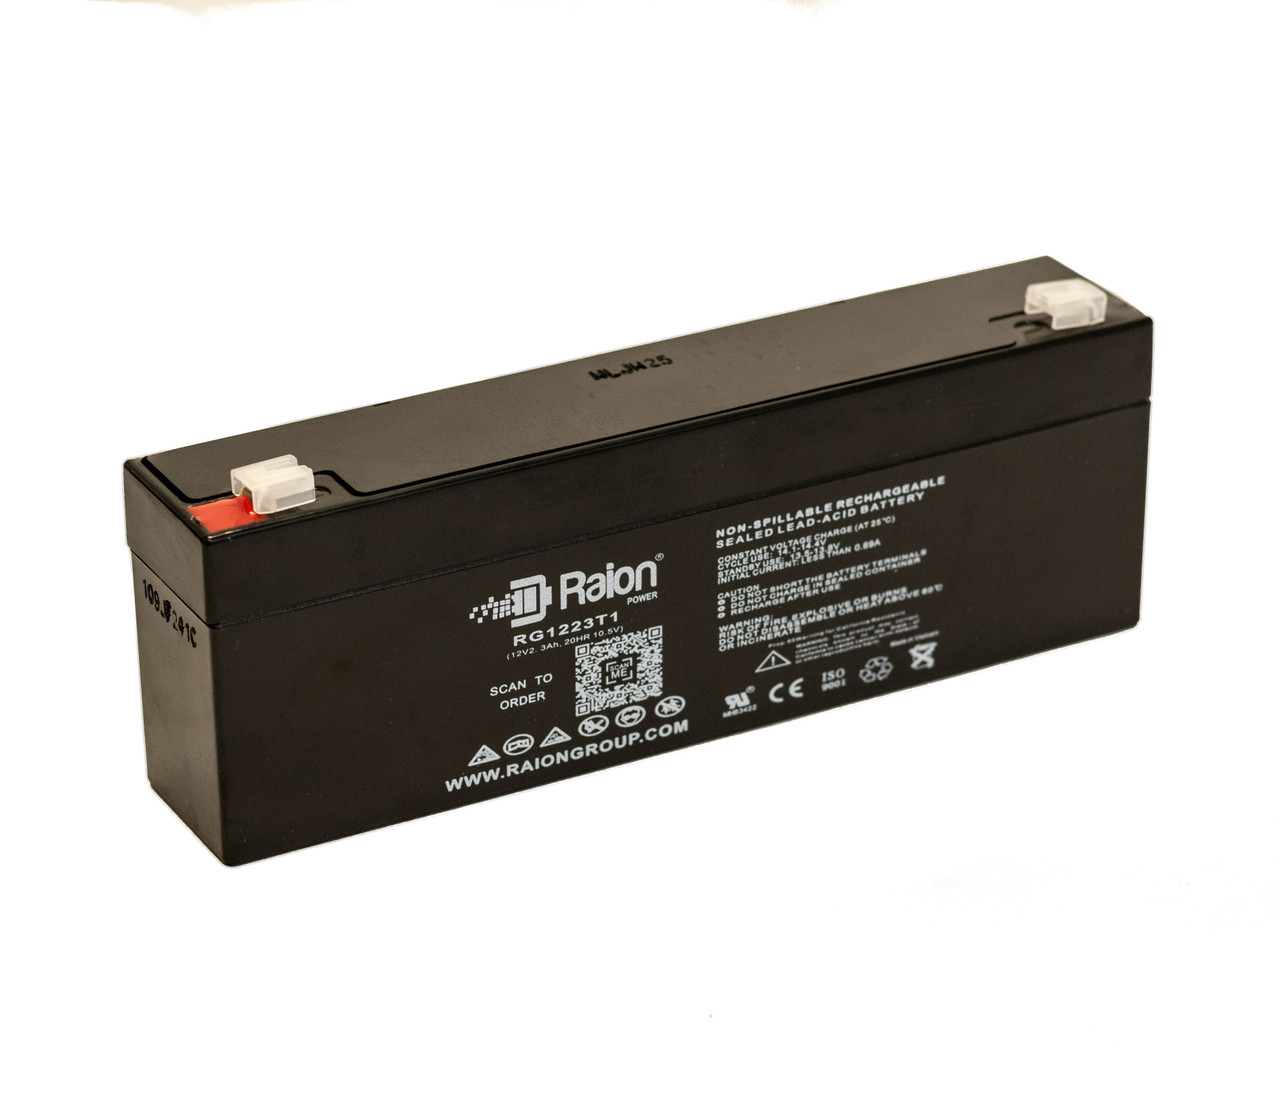 Raion Power RG1223T1 Replacement Battery for Roman Labs NB200 Freedom Nebulizer